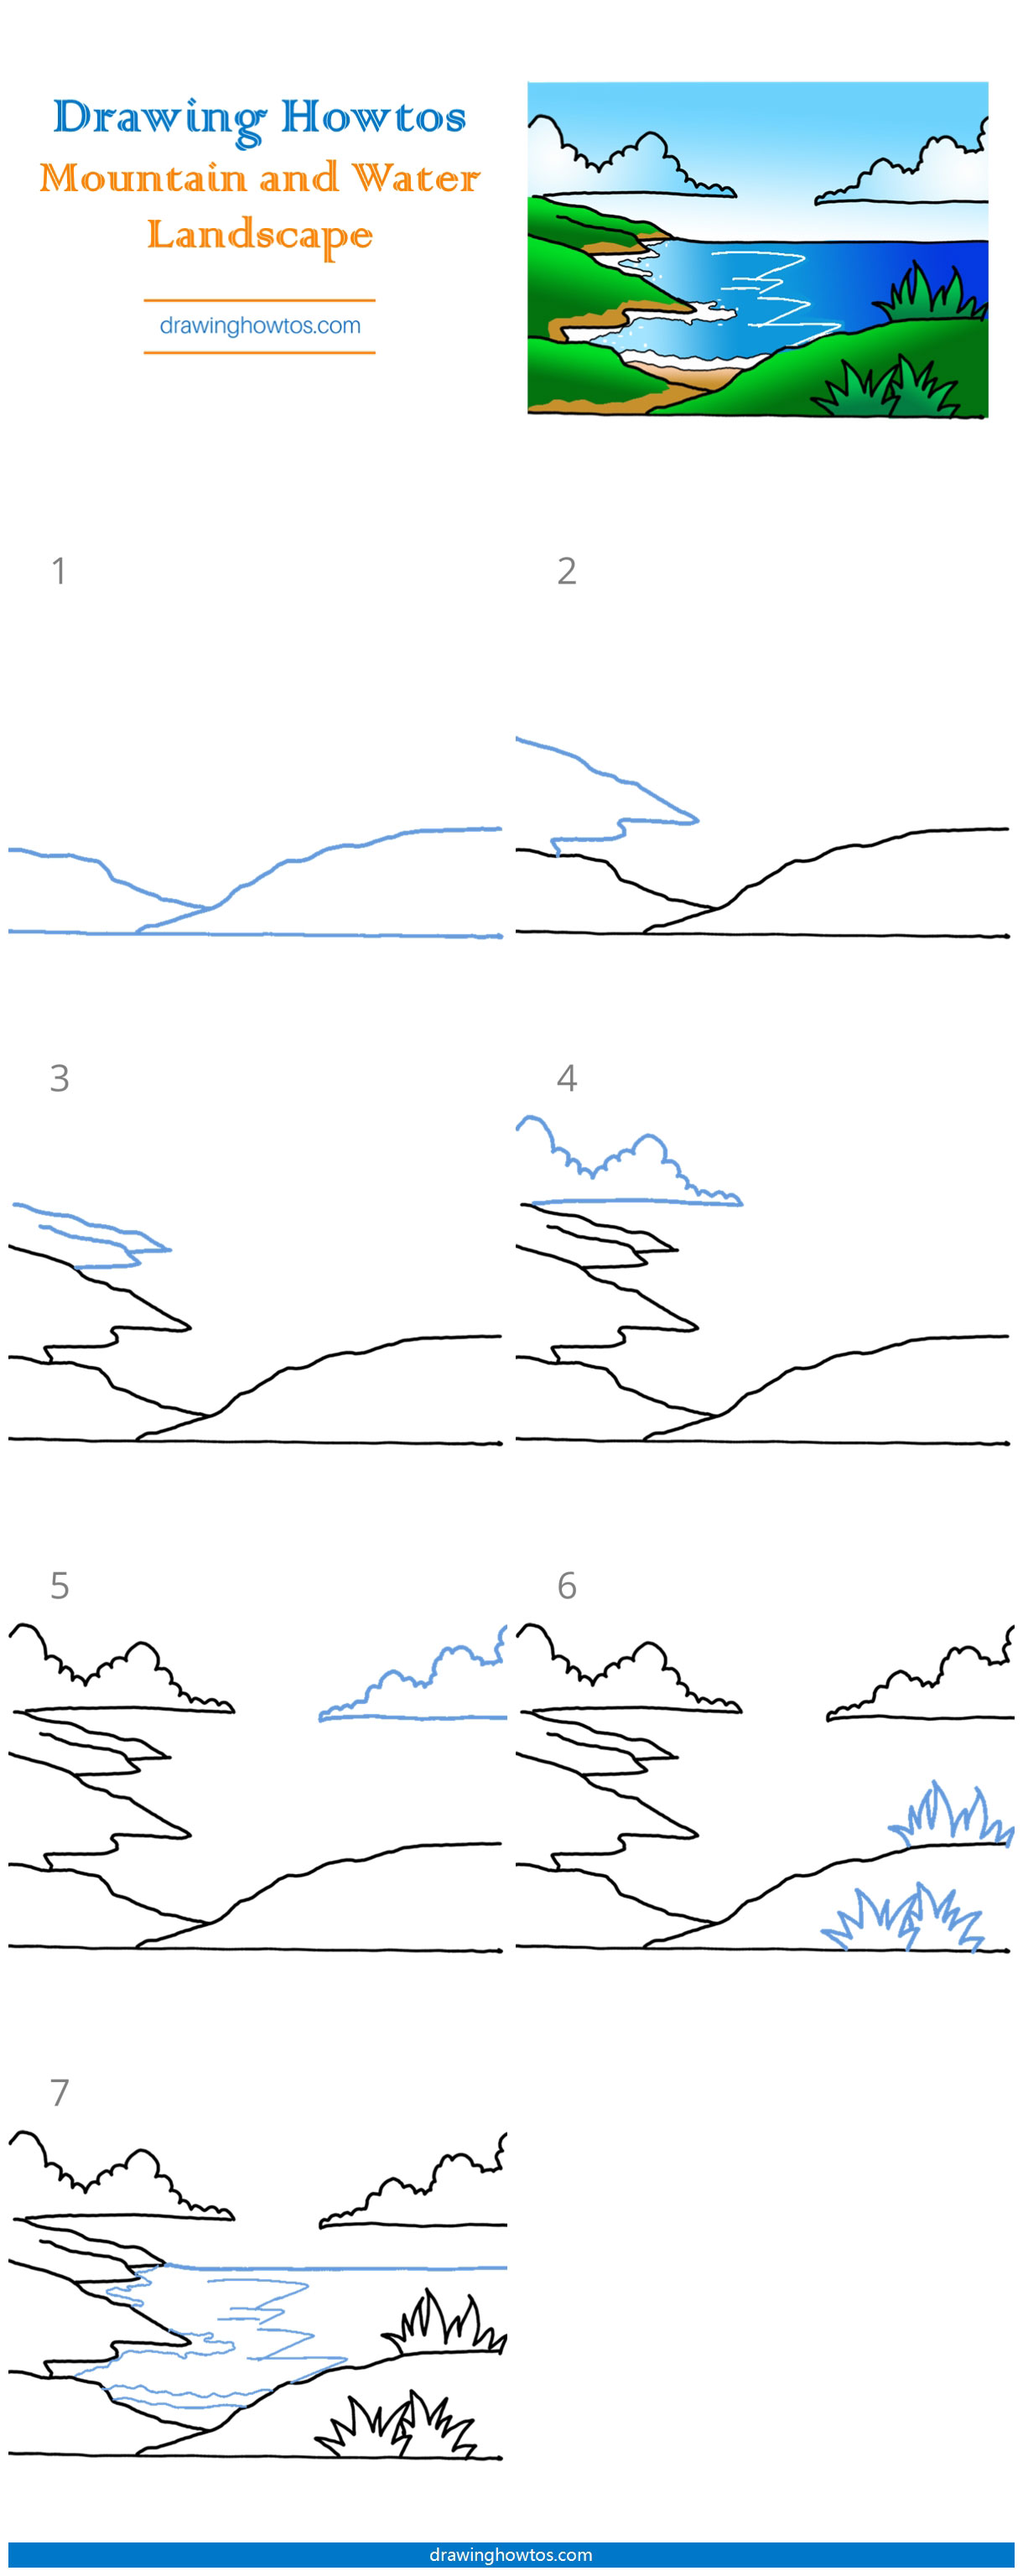 How to Draw a Moutain and Water Landscape Step by Step